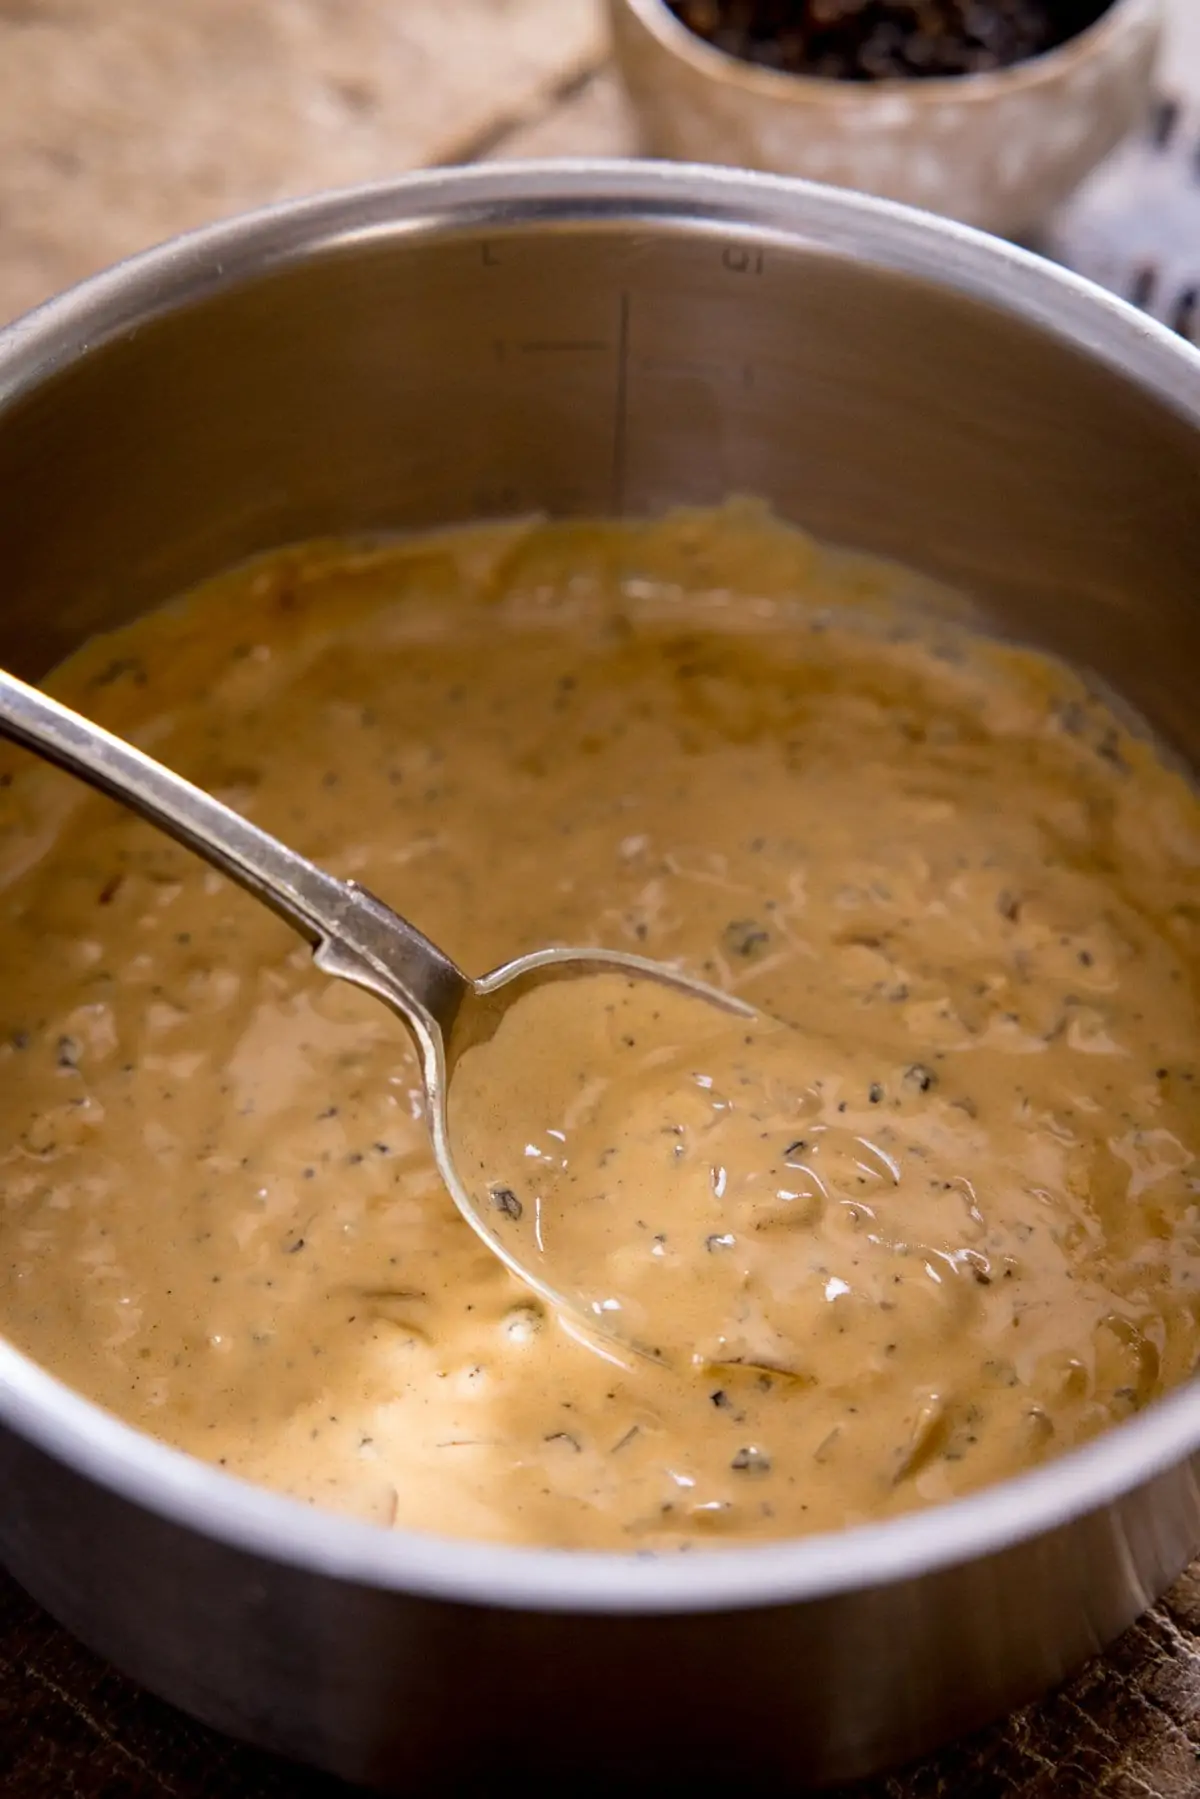 A tall image of a pan of peppercorn sauce being stirred with a metal spoon